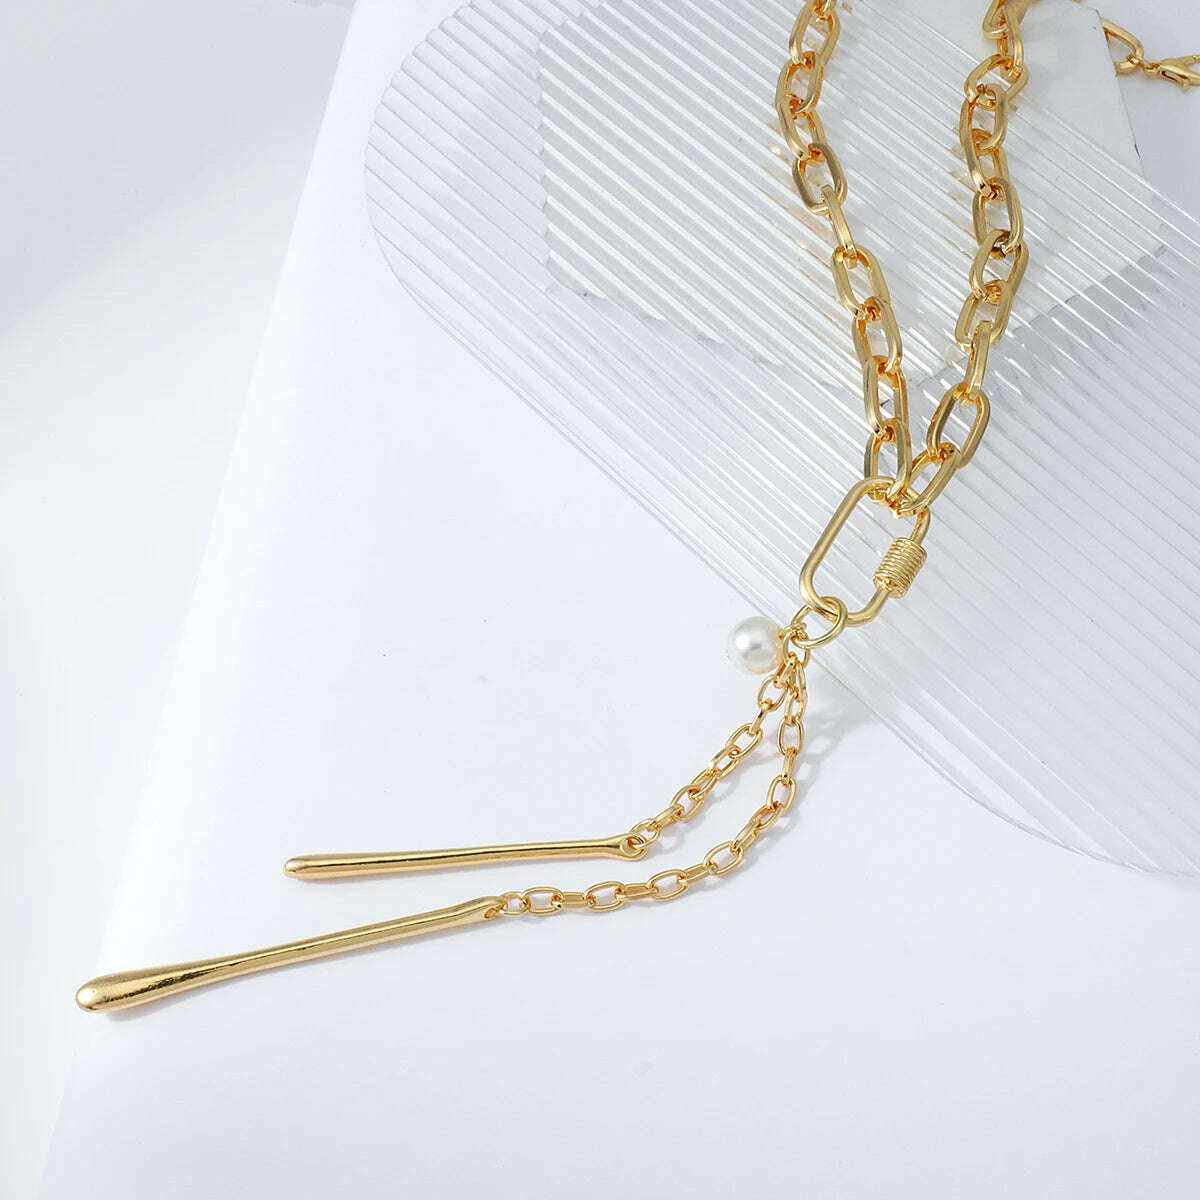 KIMLUD, Flashbuy Gold Color Chain Necklace for Women New Design Pearl Metal Long Chain Geometric Pendant Necklace Statement Jewelry, KIMLUD Womens Clothes